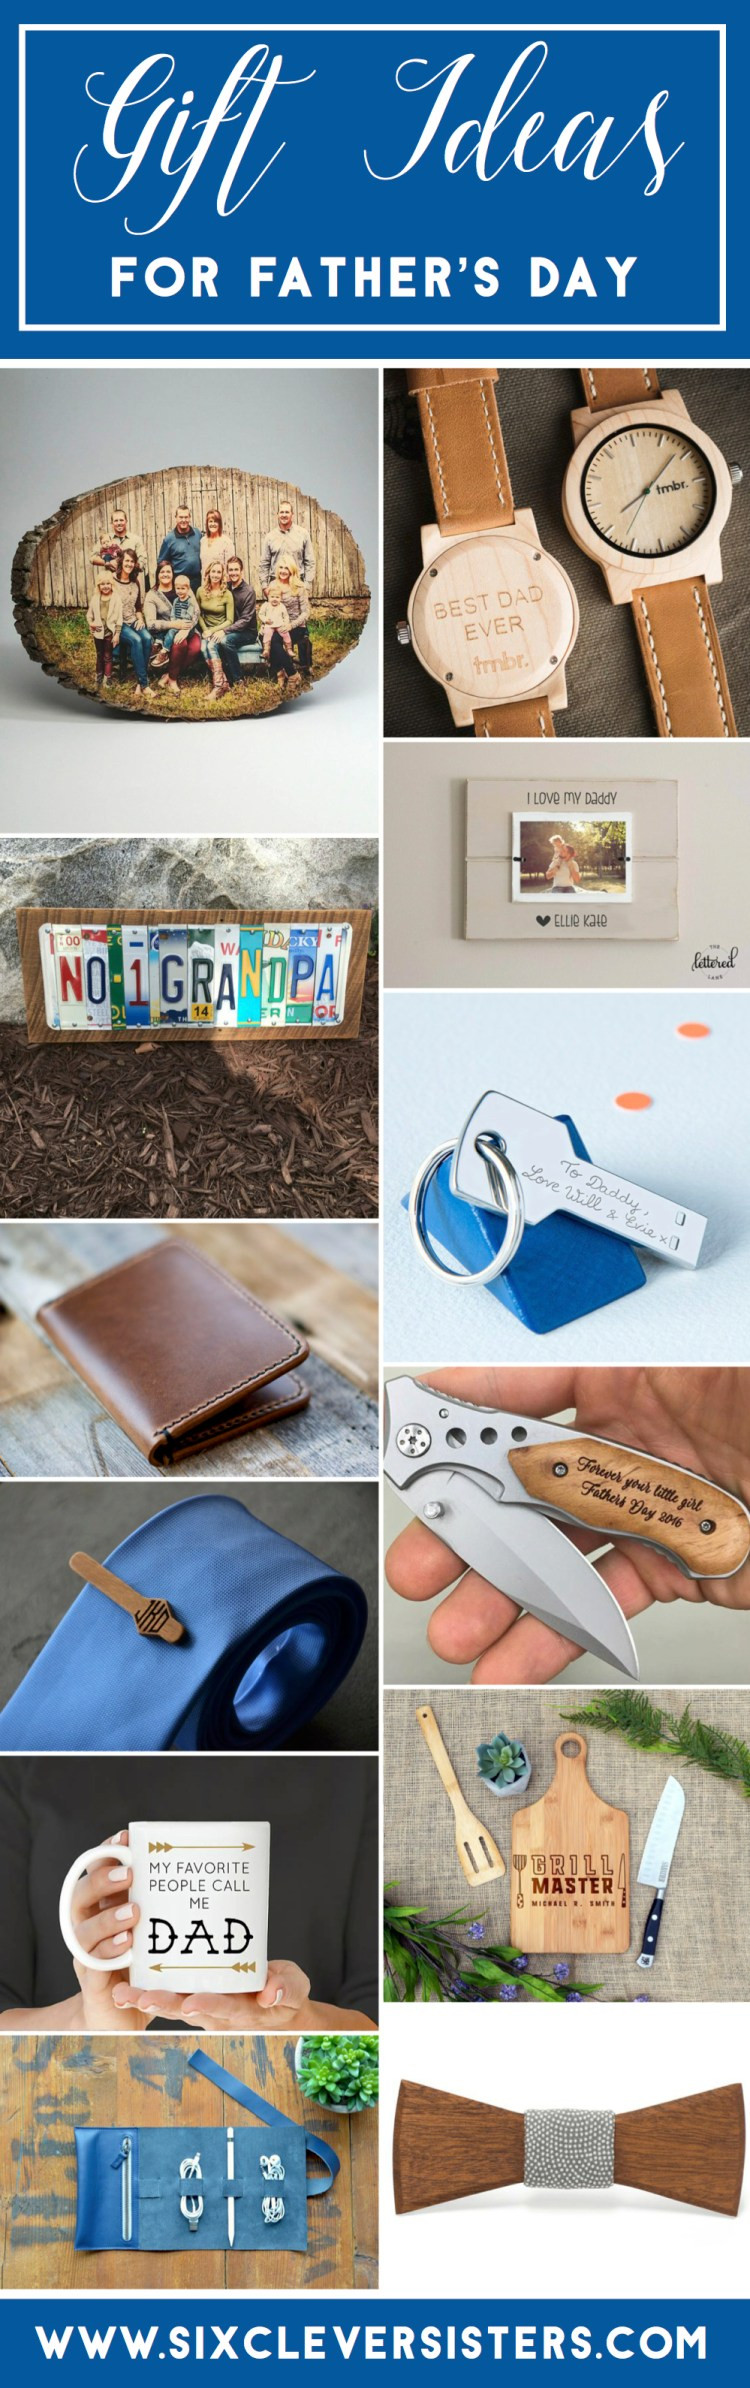 Unique Father'S Day Gift Ideas
 25 Great Father s Day Gift Ideas on Etsy that are amazing